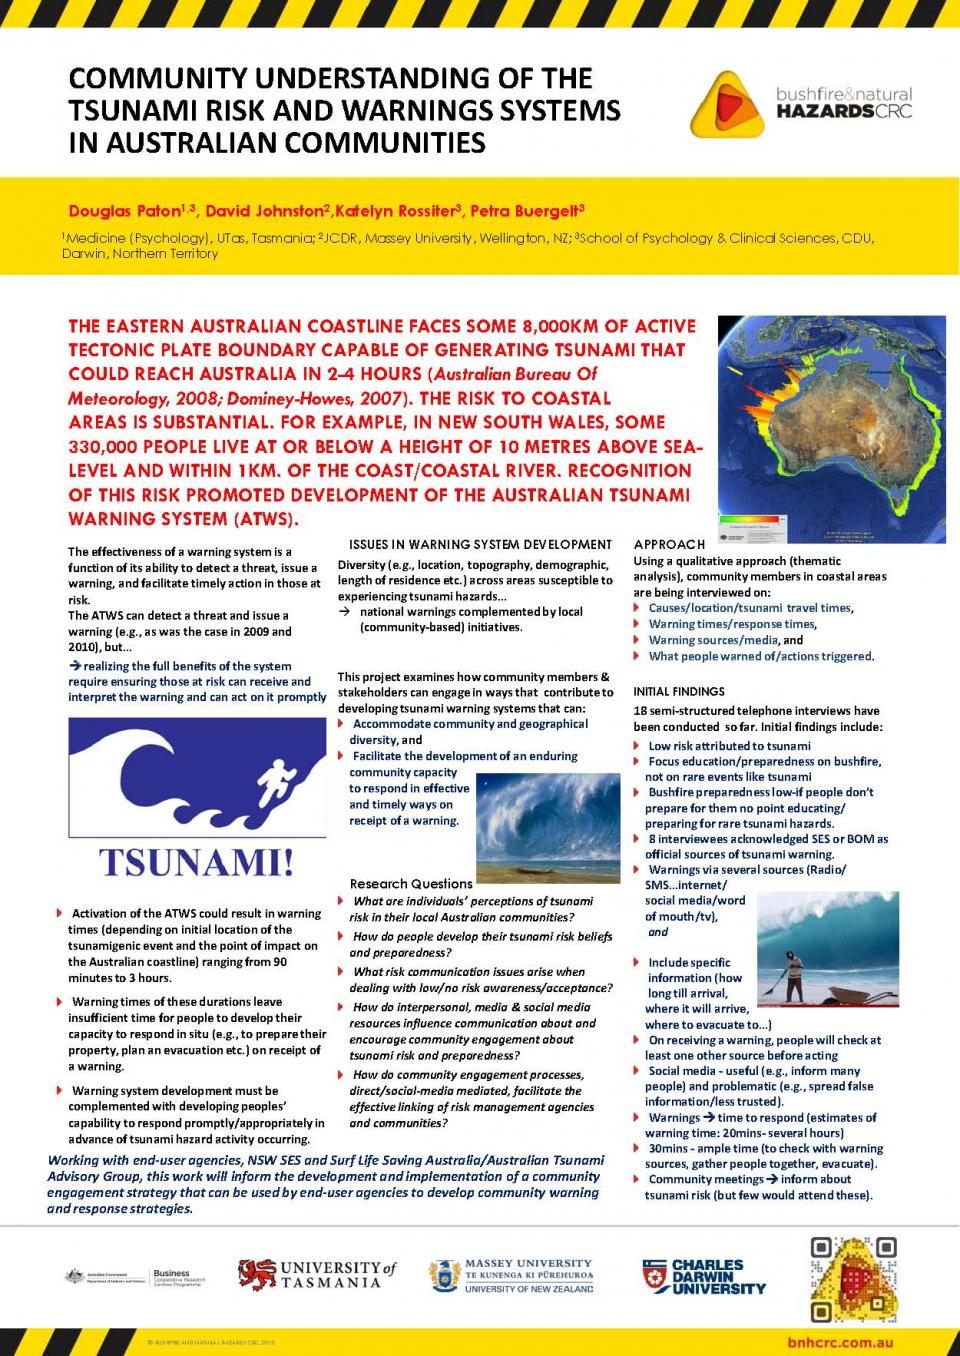 Community Understanding of the Tsunami Risk and Warning Systems in Australian Communities